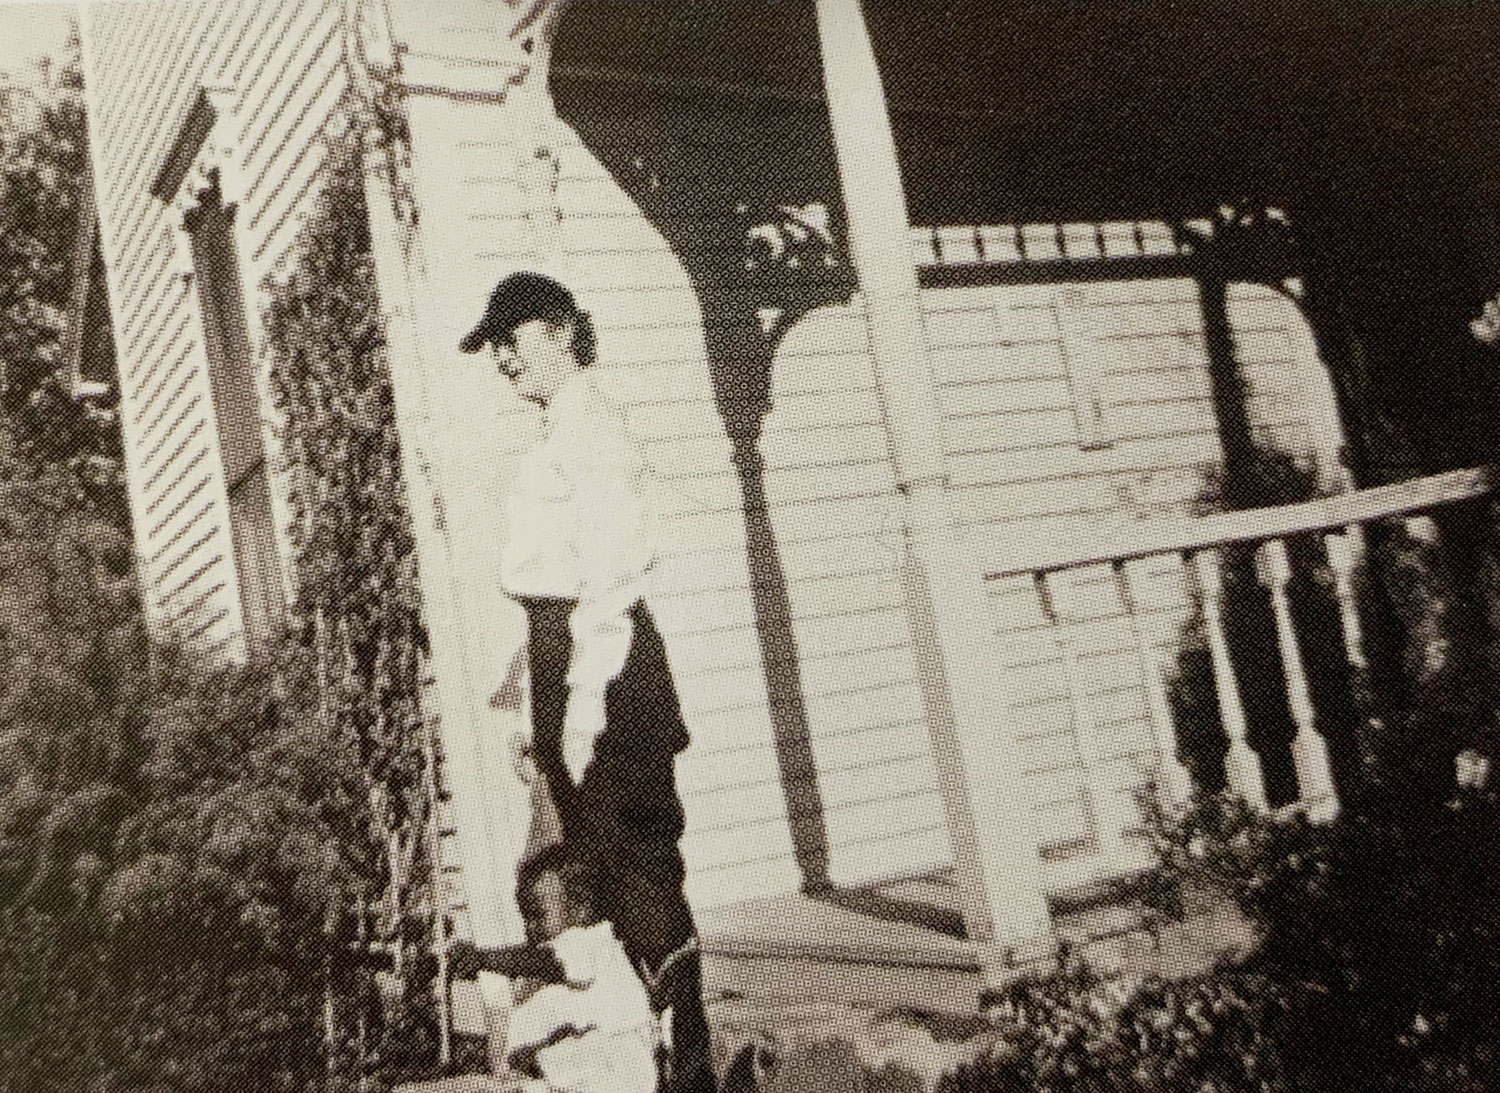 Ammie Wilson on the back porch of her house with her namesake, Ammie Sanders // courtesy Heritage Farmstead Museum